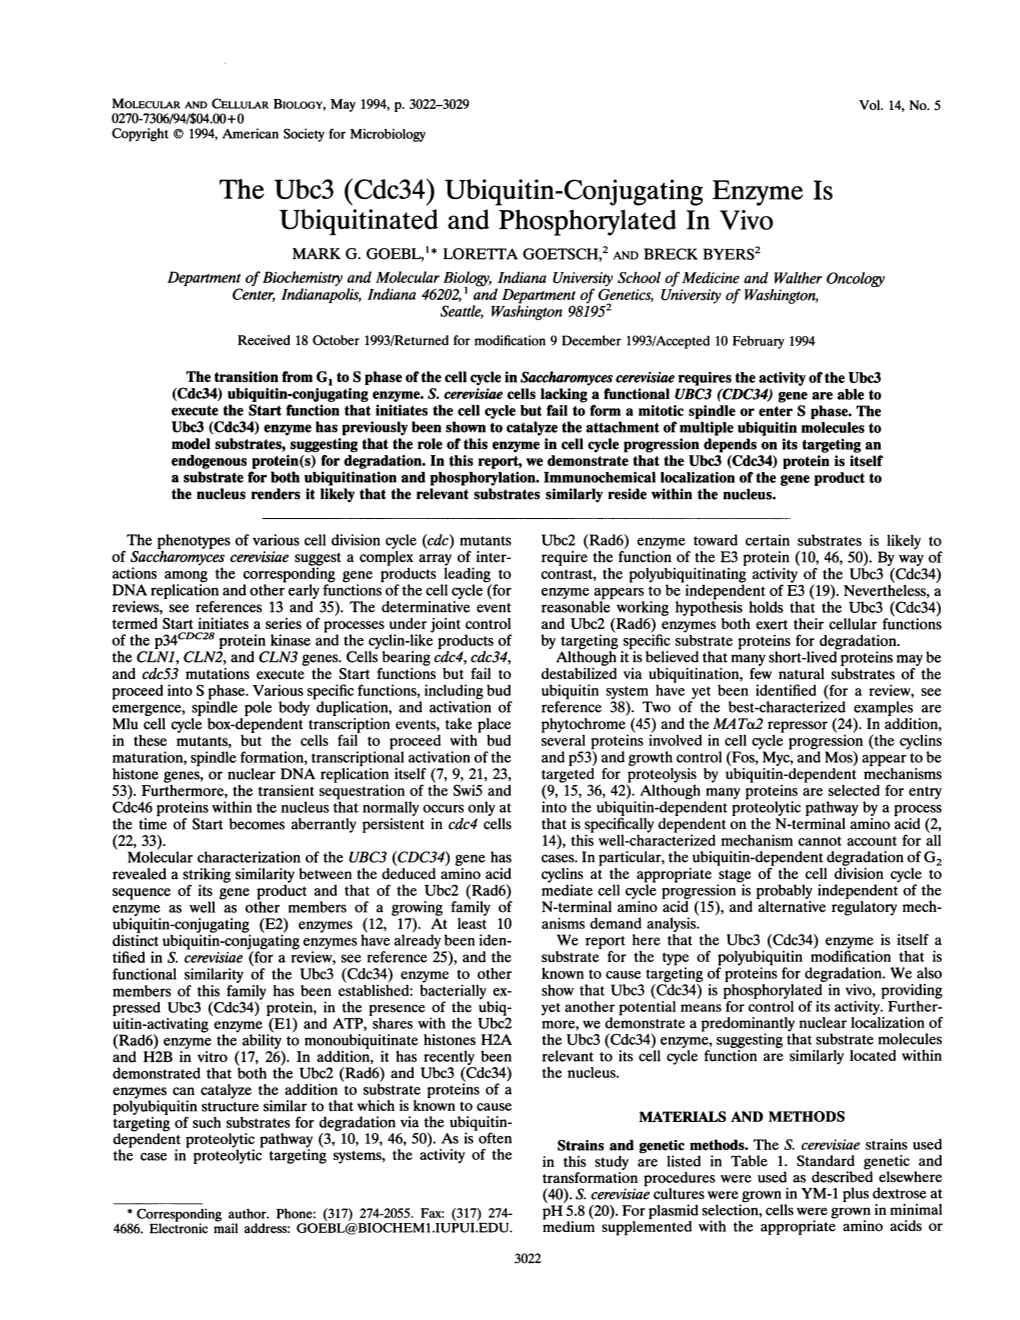 The Ubc3 (Cdc34) Ubiquitin-Conjugating Enzyme Is Ubiquitinated and Phosphorylated in Vivo MARK G